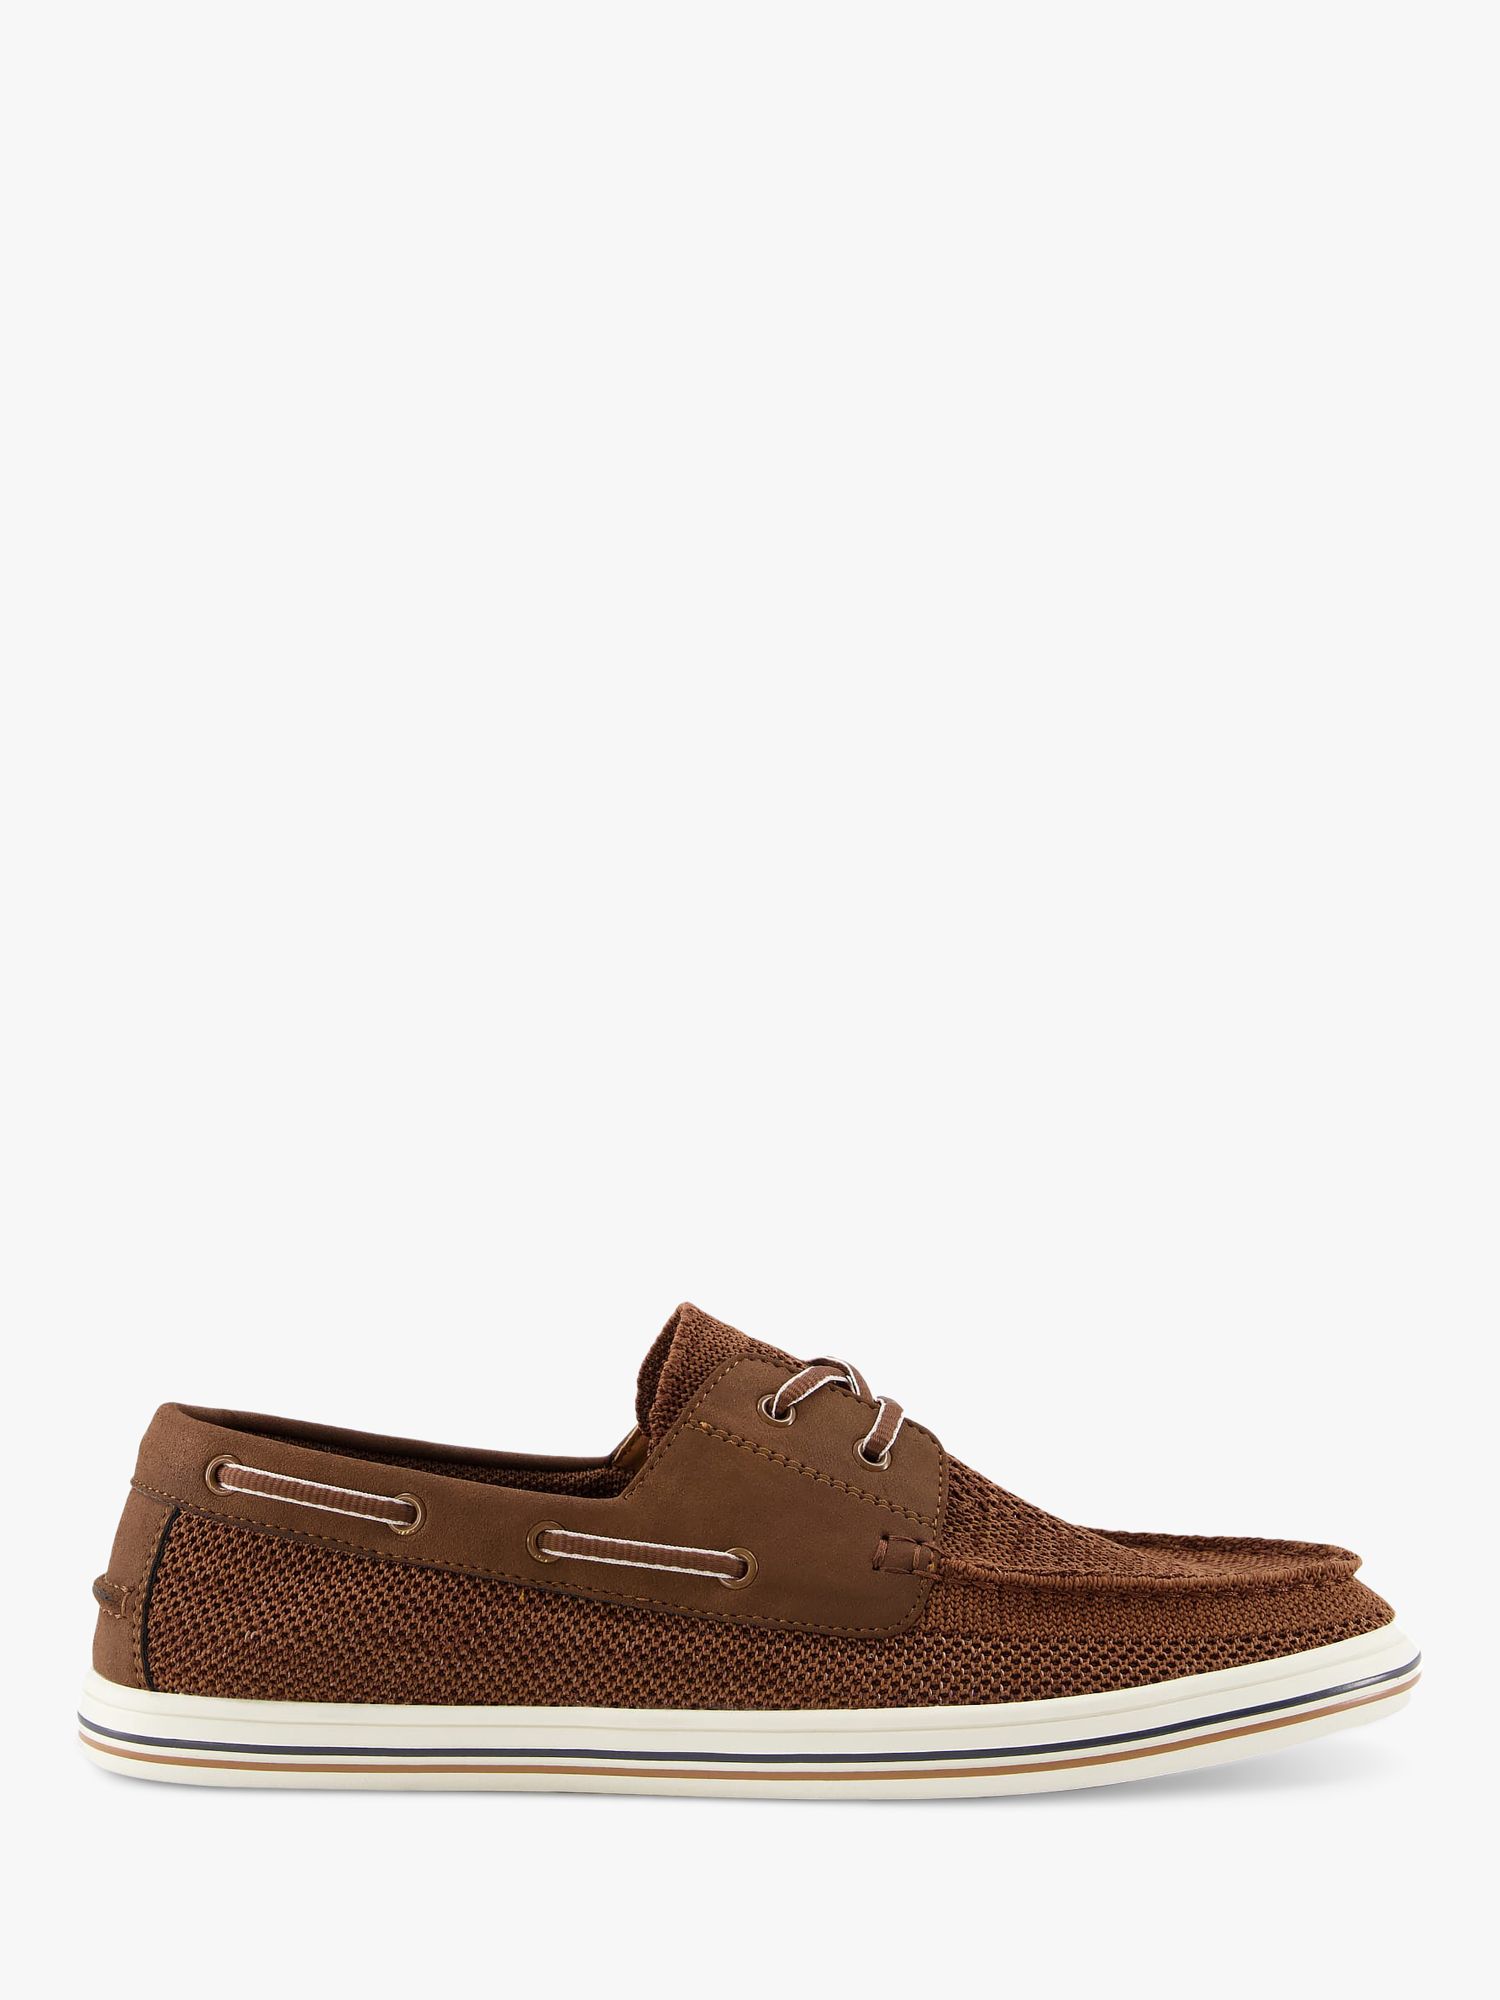 Dune Burnner Knitted Boat Shoes, Tan-fabric at John Lewis & Partners